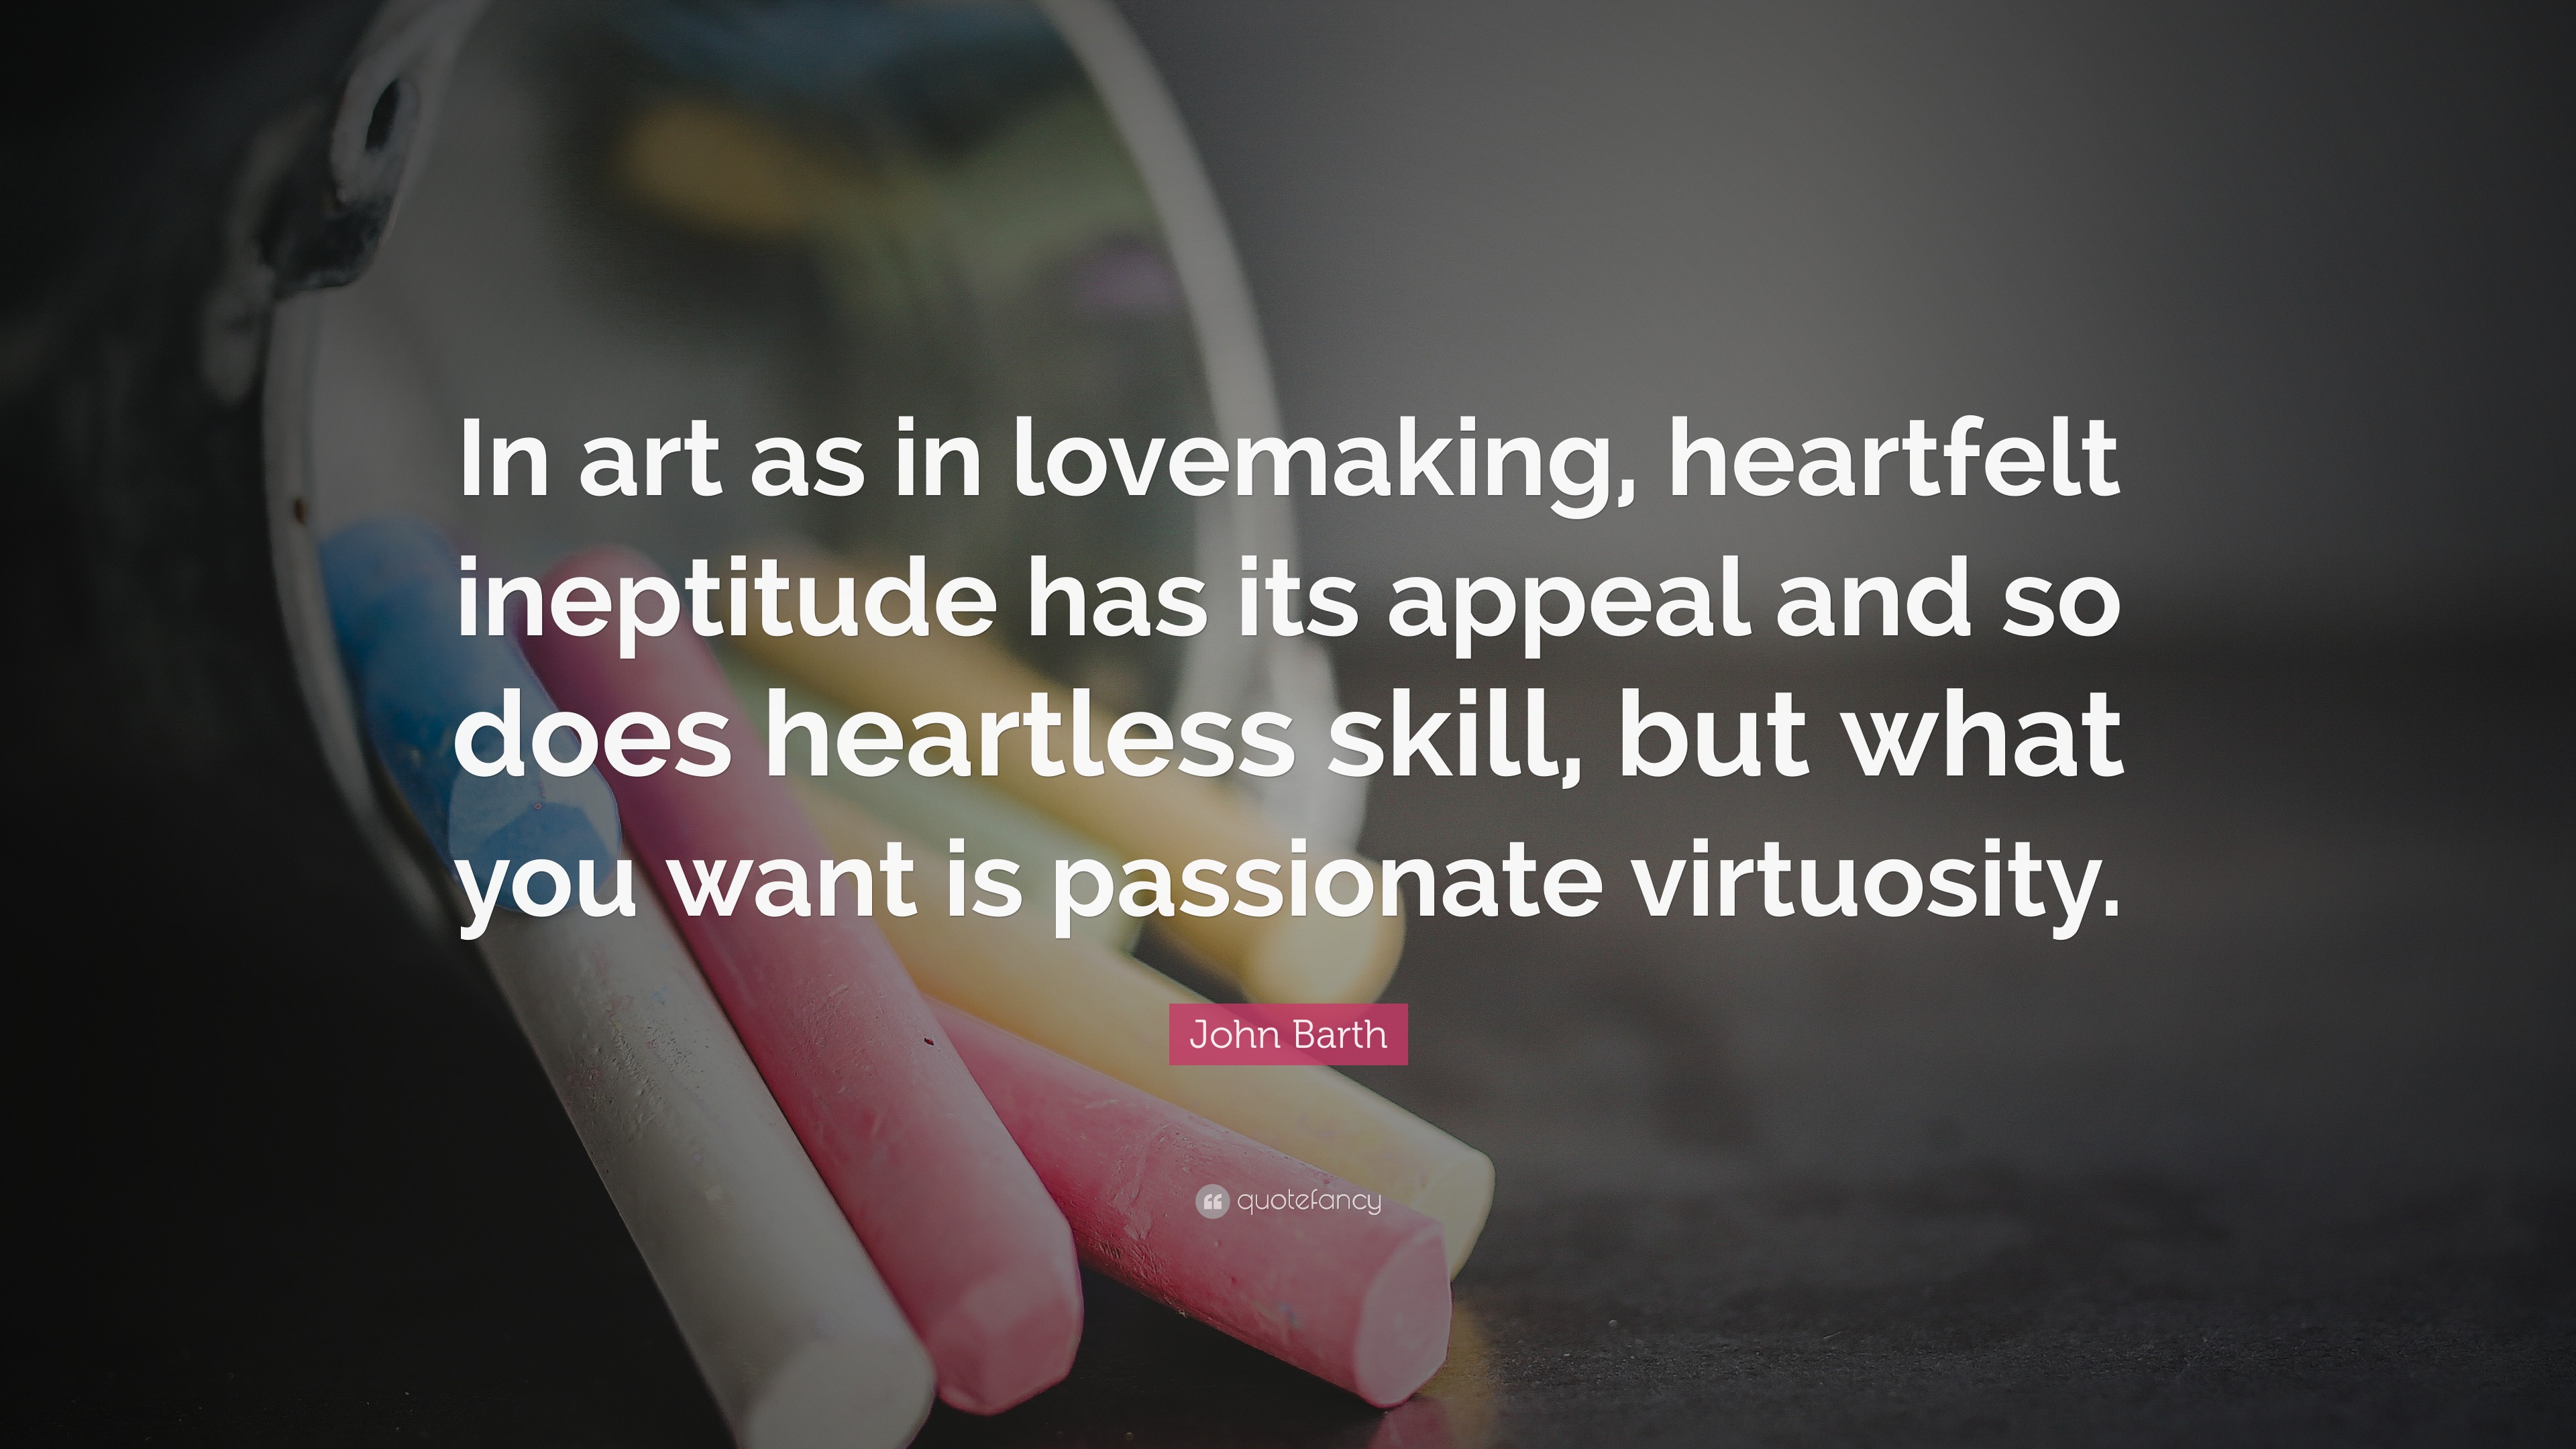 John Barth Quote “In art as in lovemaking heartfelt ineptitude has its appeal